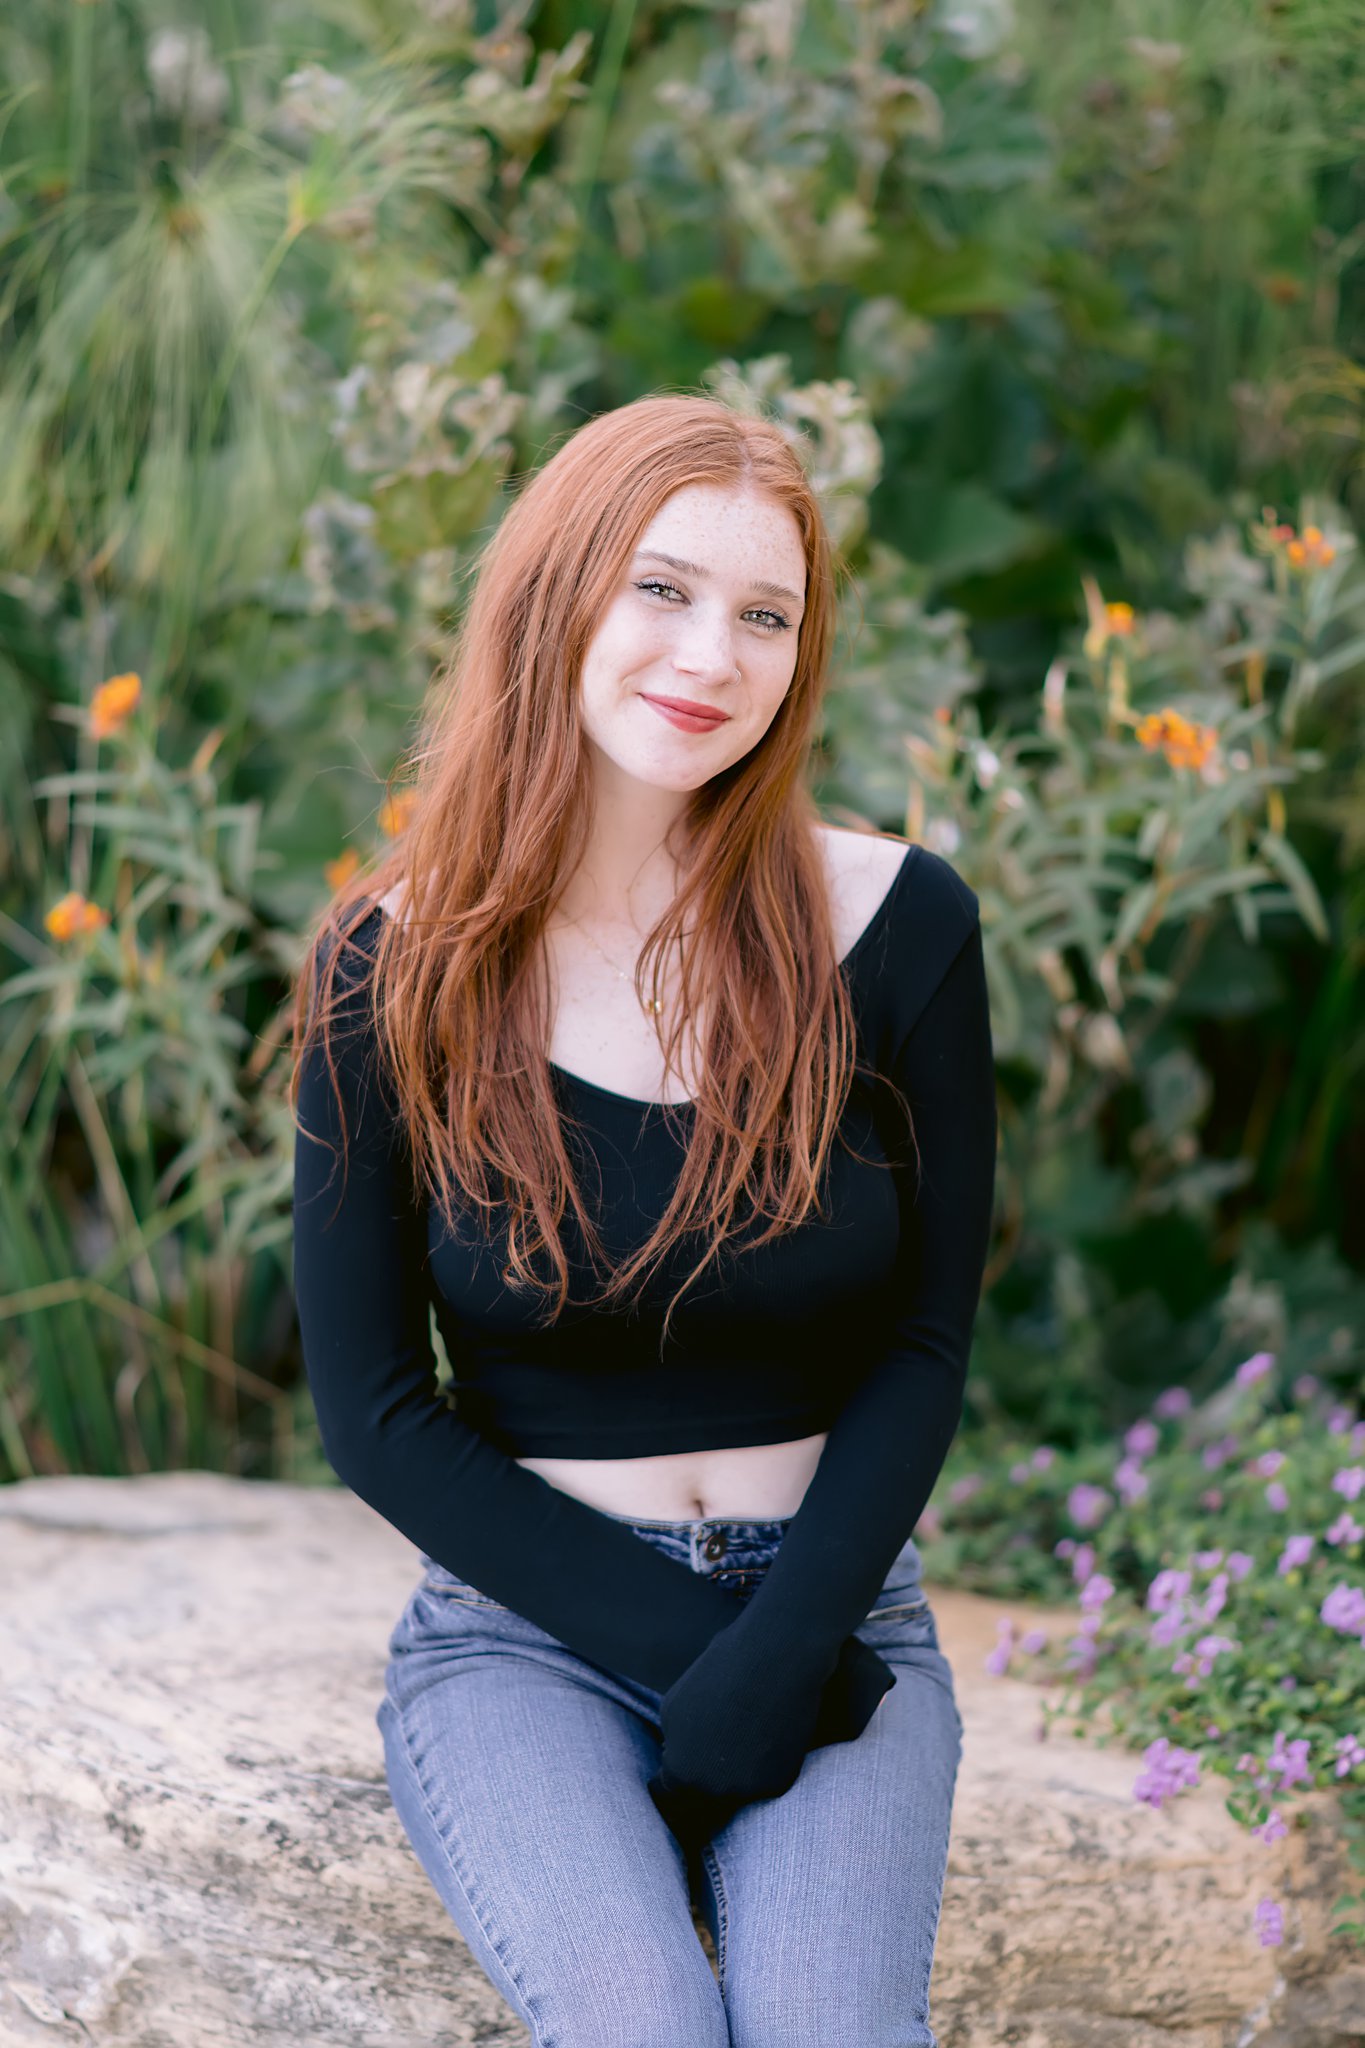 high school senior with red hair sitting on a stone wall wearing a black shirt and blue jeans after a San Luis Obispo tutoring session